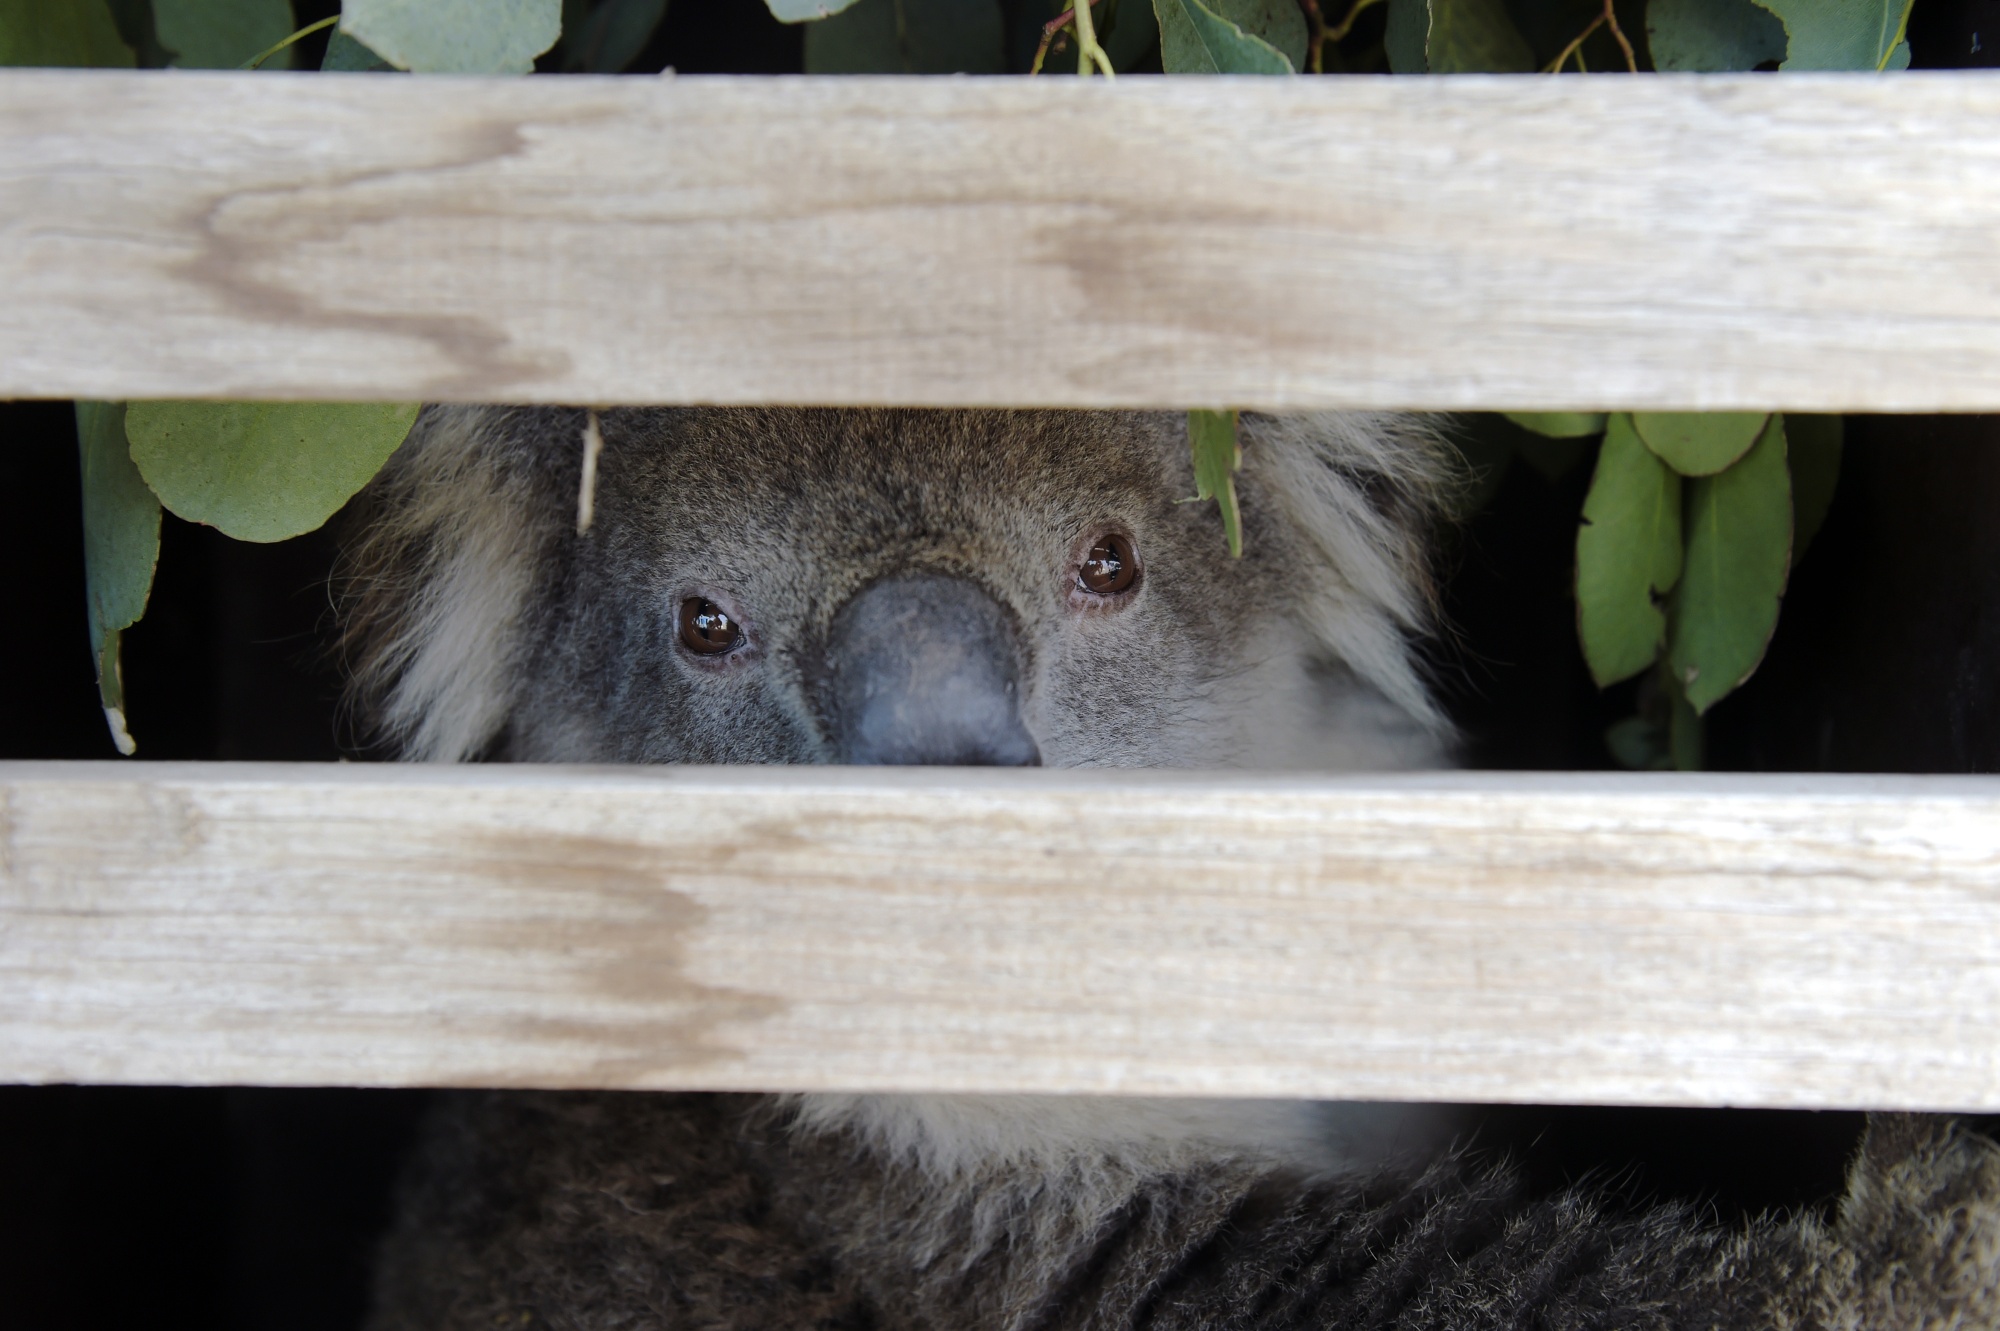 A World Without Koalas? Losing the Marsupial Could Make Australian